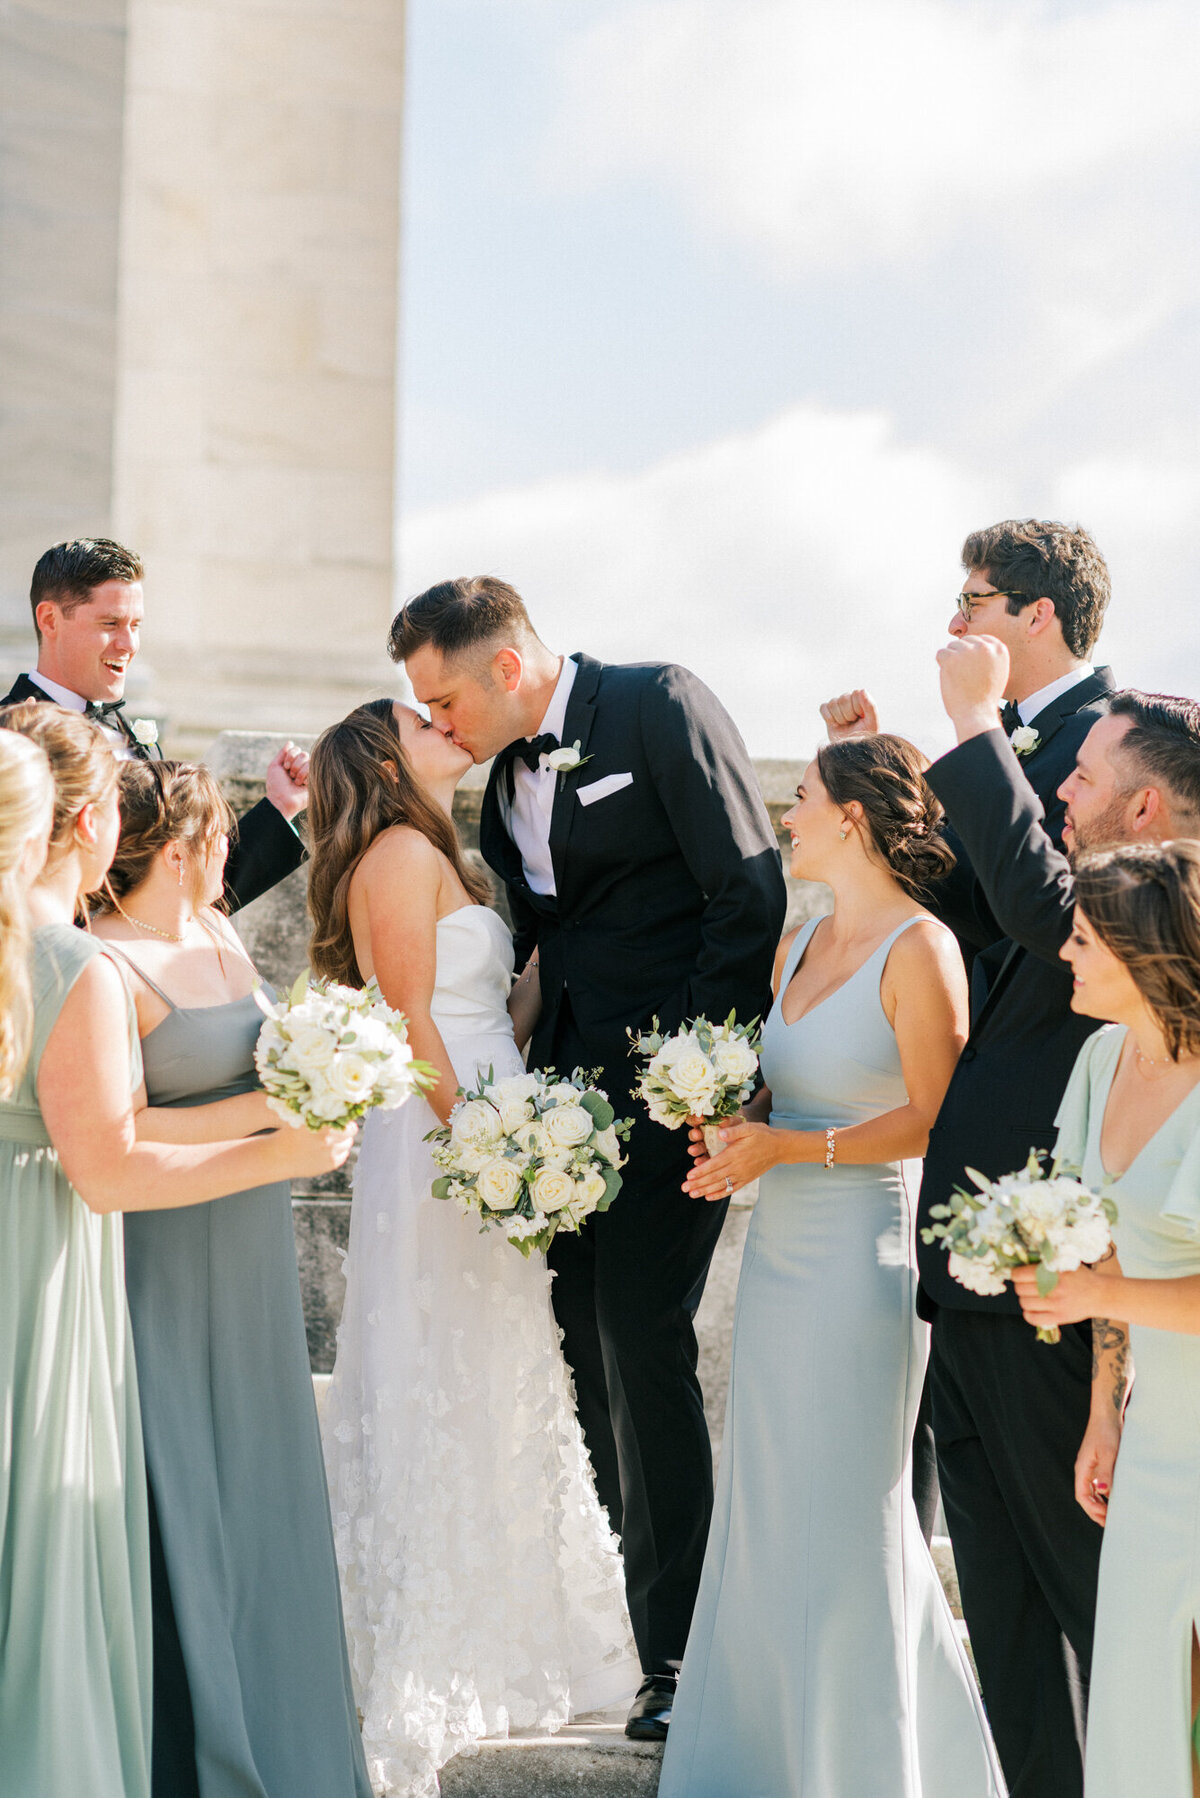 A candid wedding party portrait in Chicago